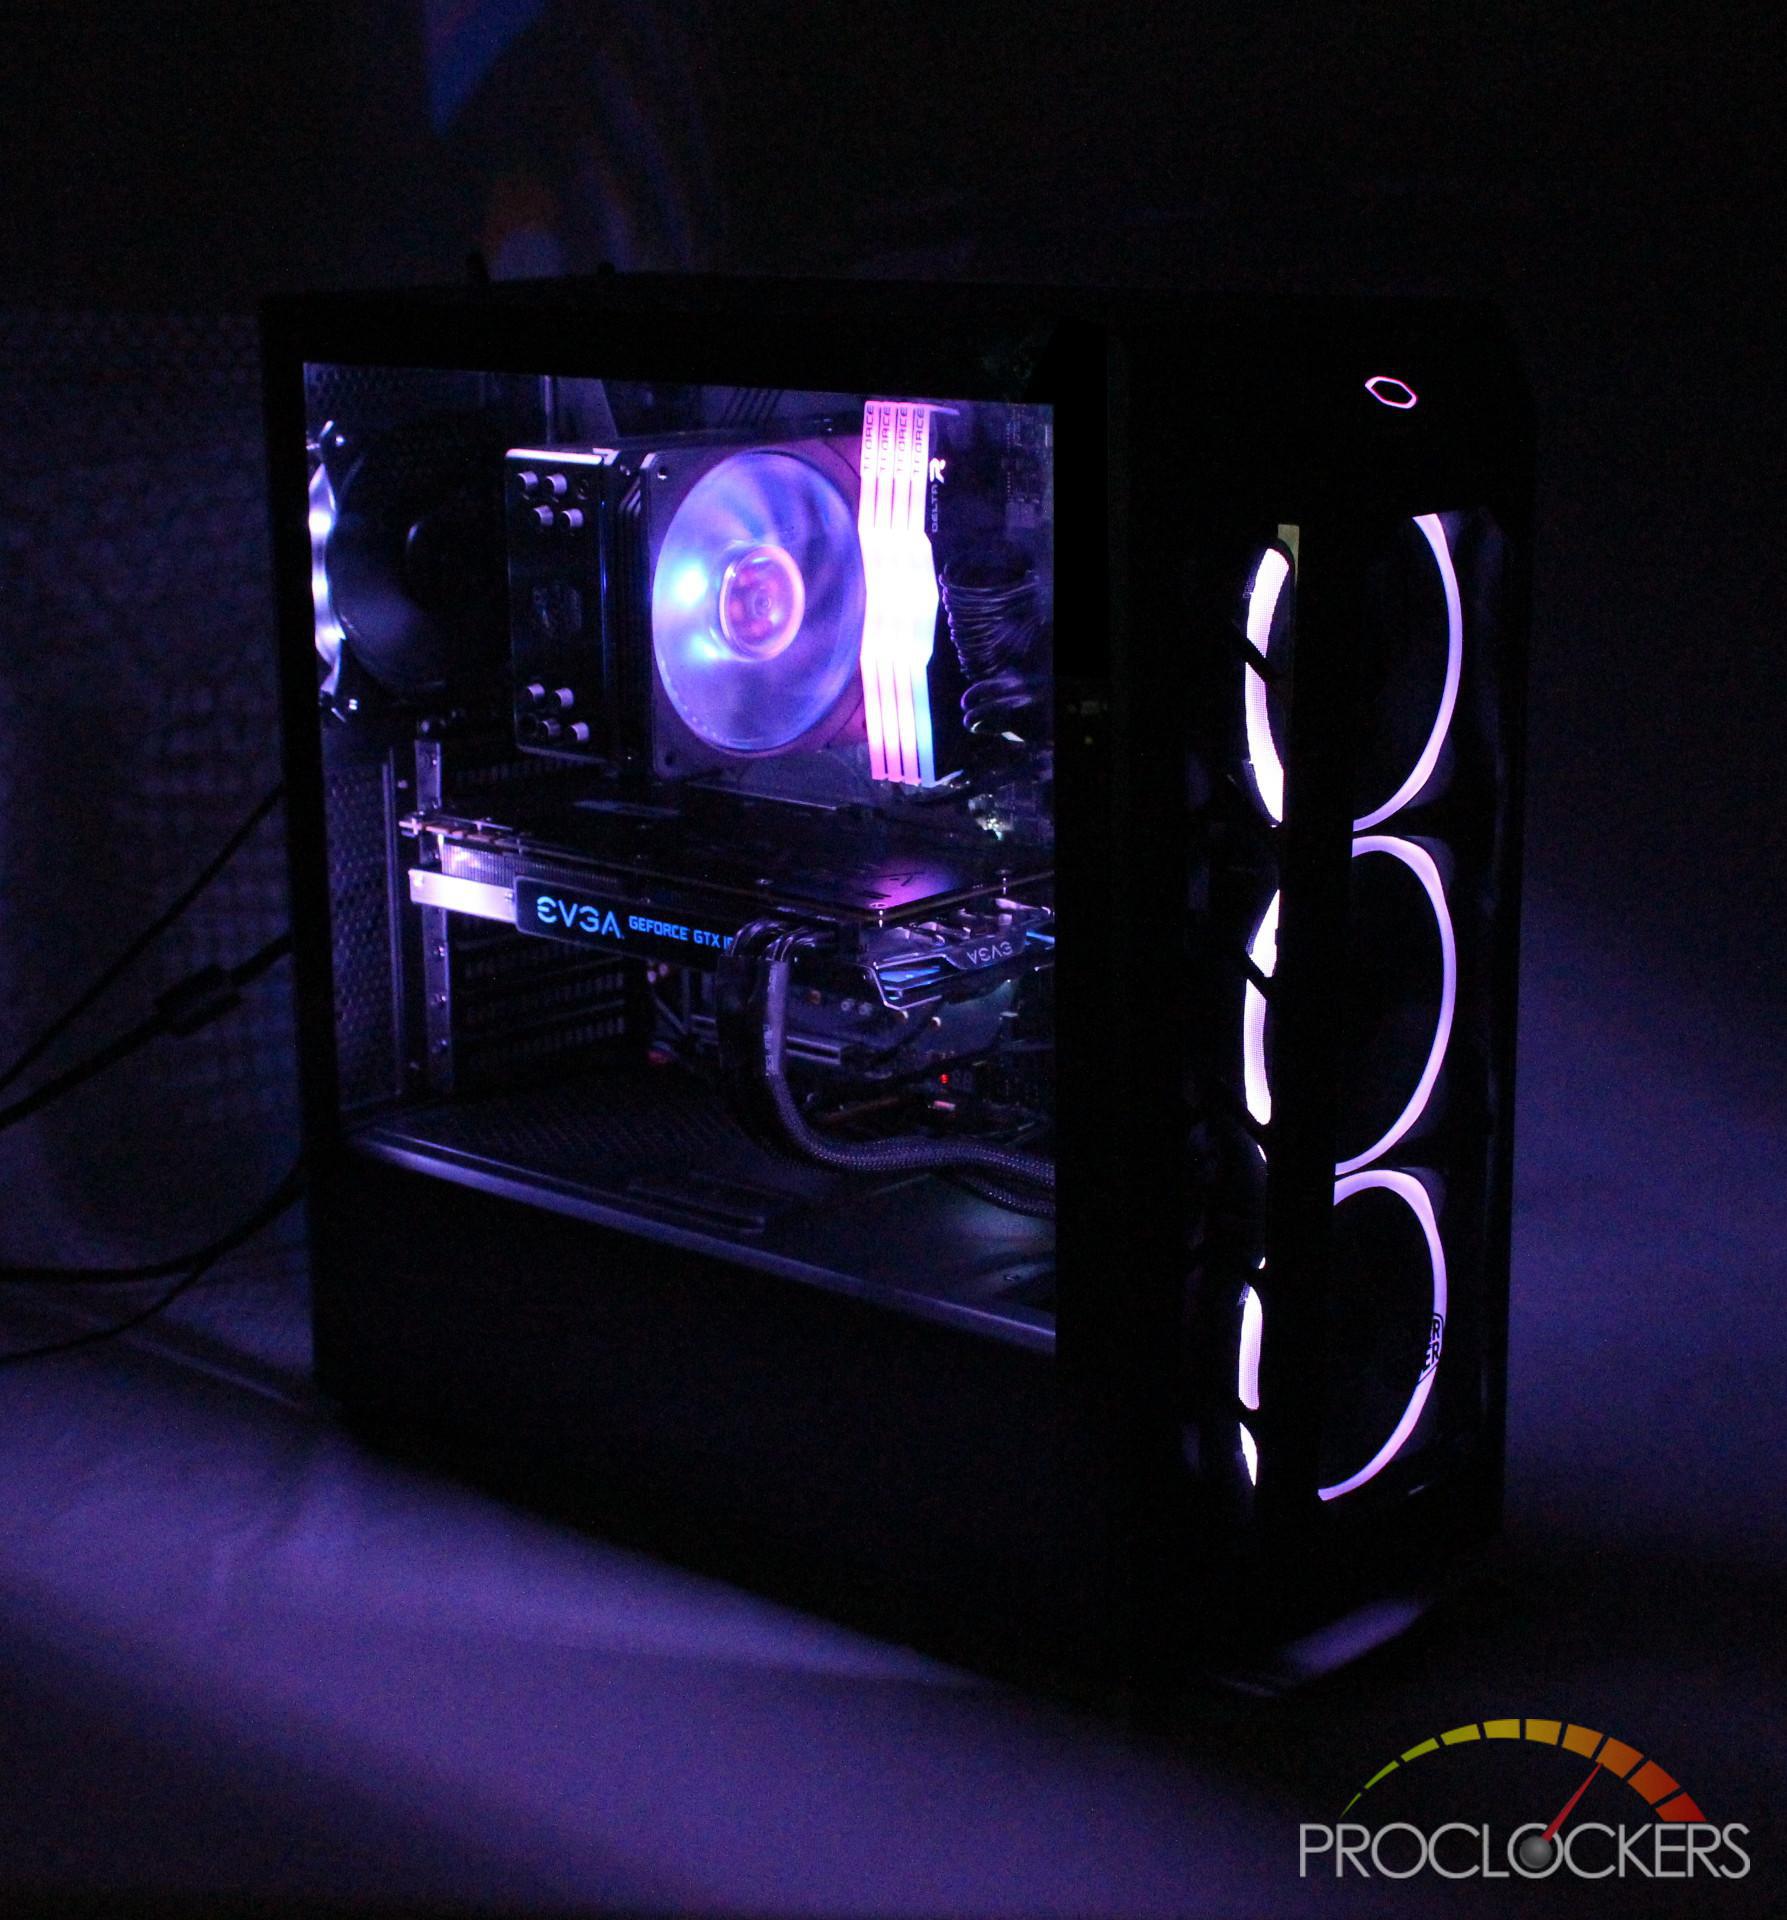 NZXT's Sensual RGB Lighting Will Set Your Mood Right